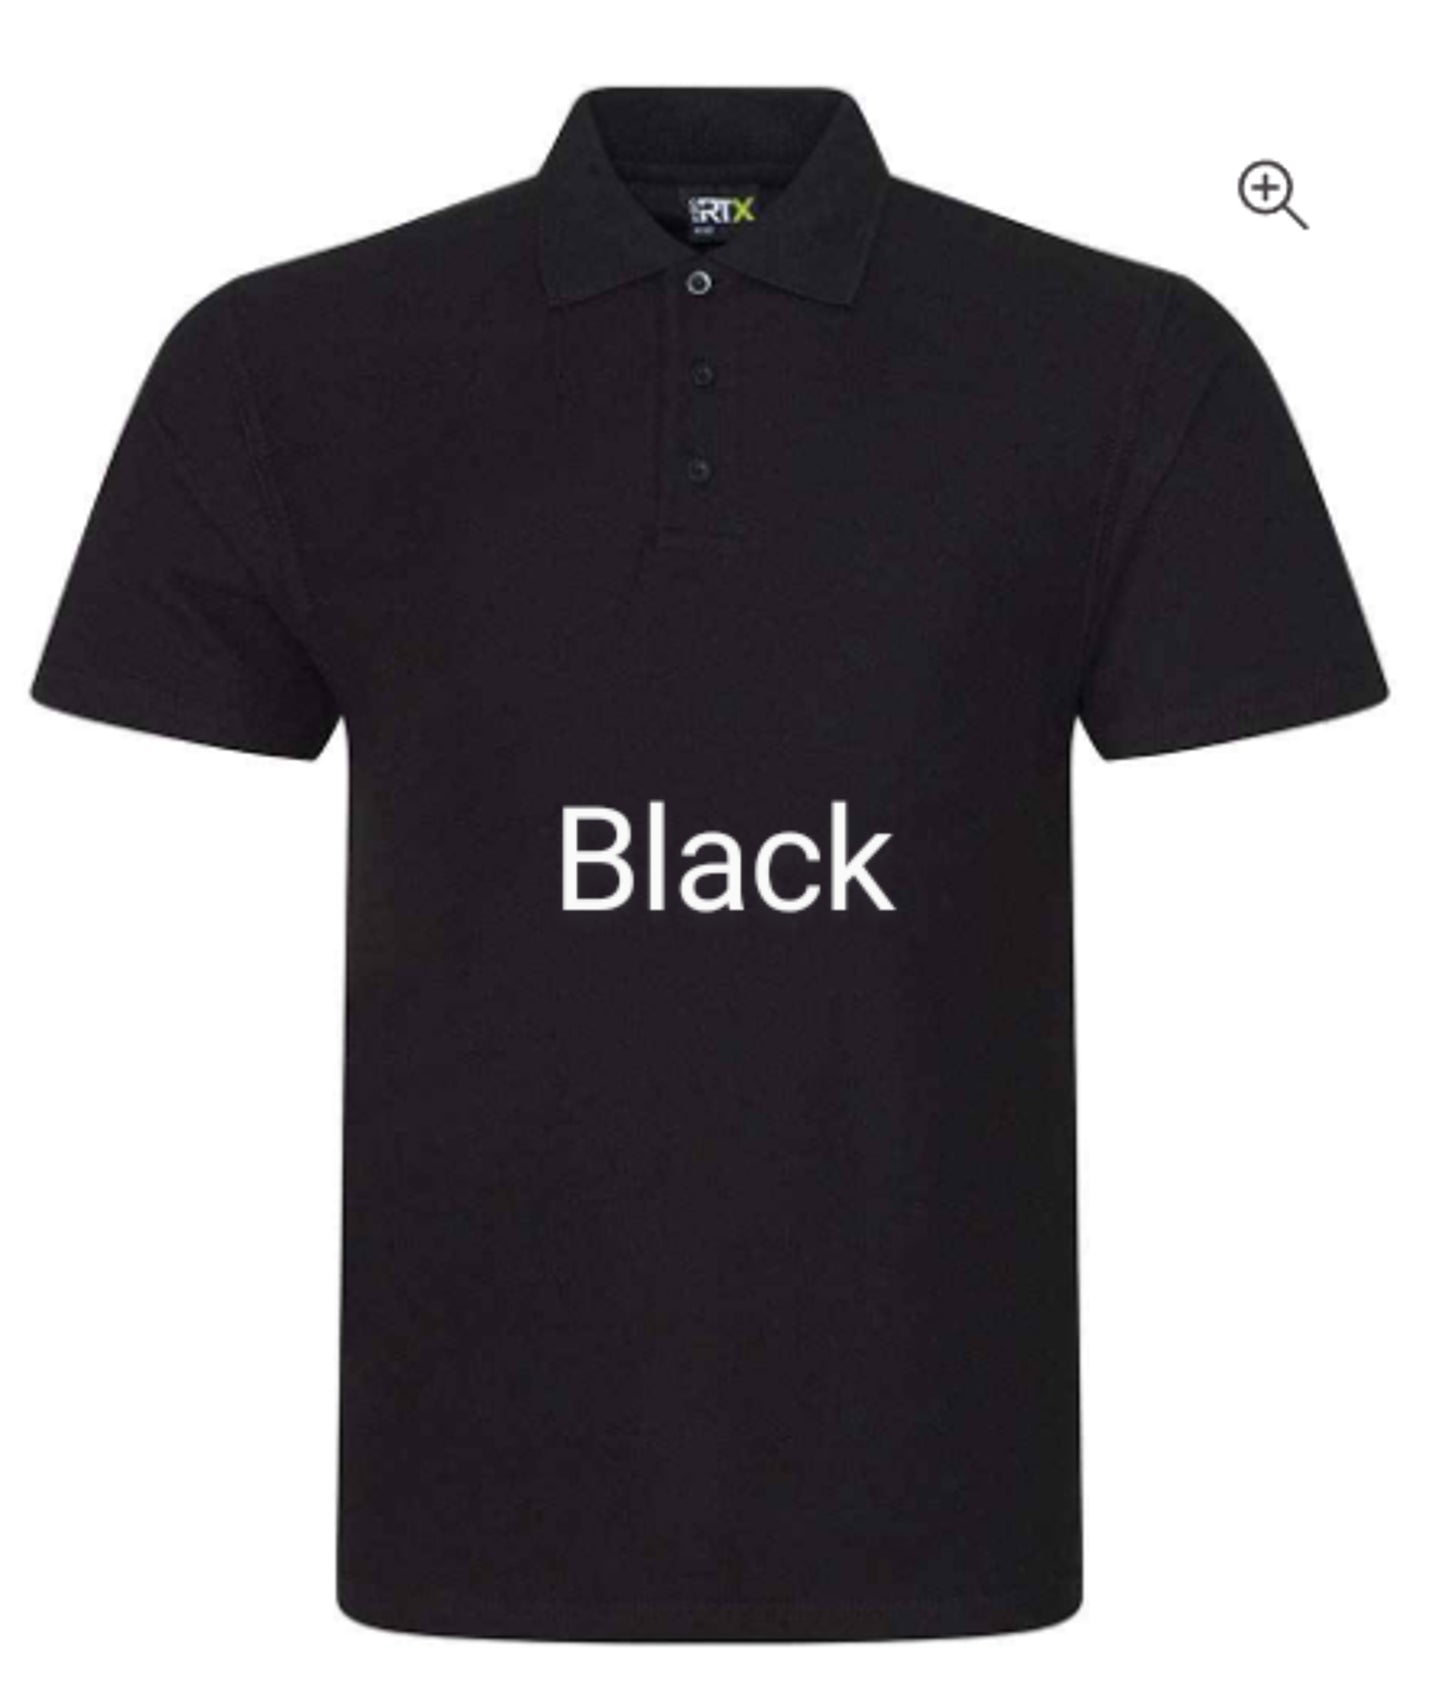 Personalised Embroidered Golf Piqué Short Sleeved Adults Unisex Polo Shirt